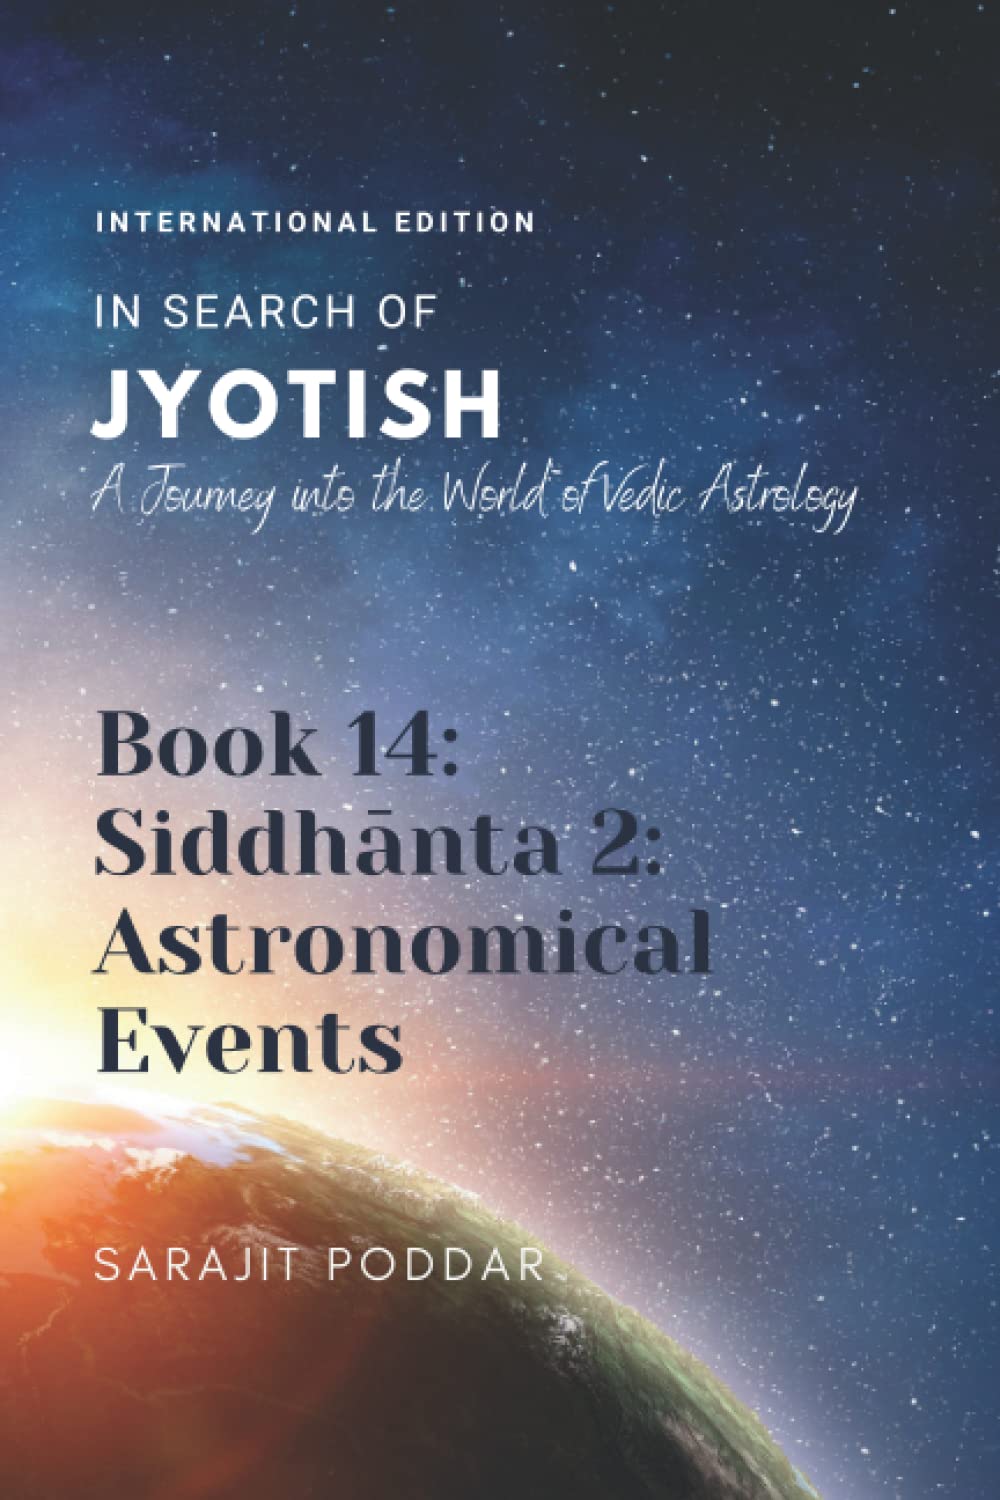 Siddhanta 2: Astronomical Events: A Journey into the World of Vedic Astrology